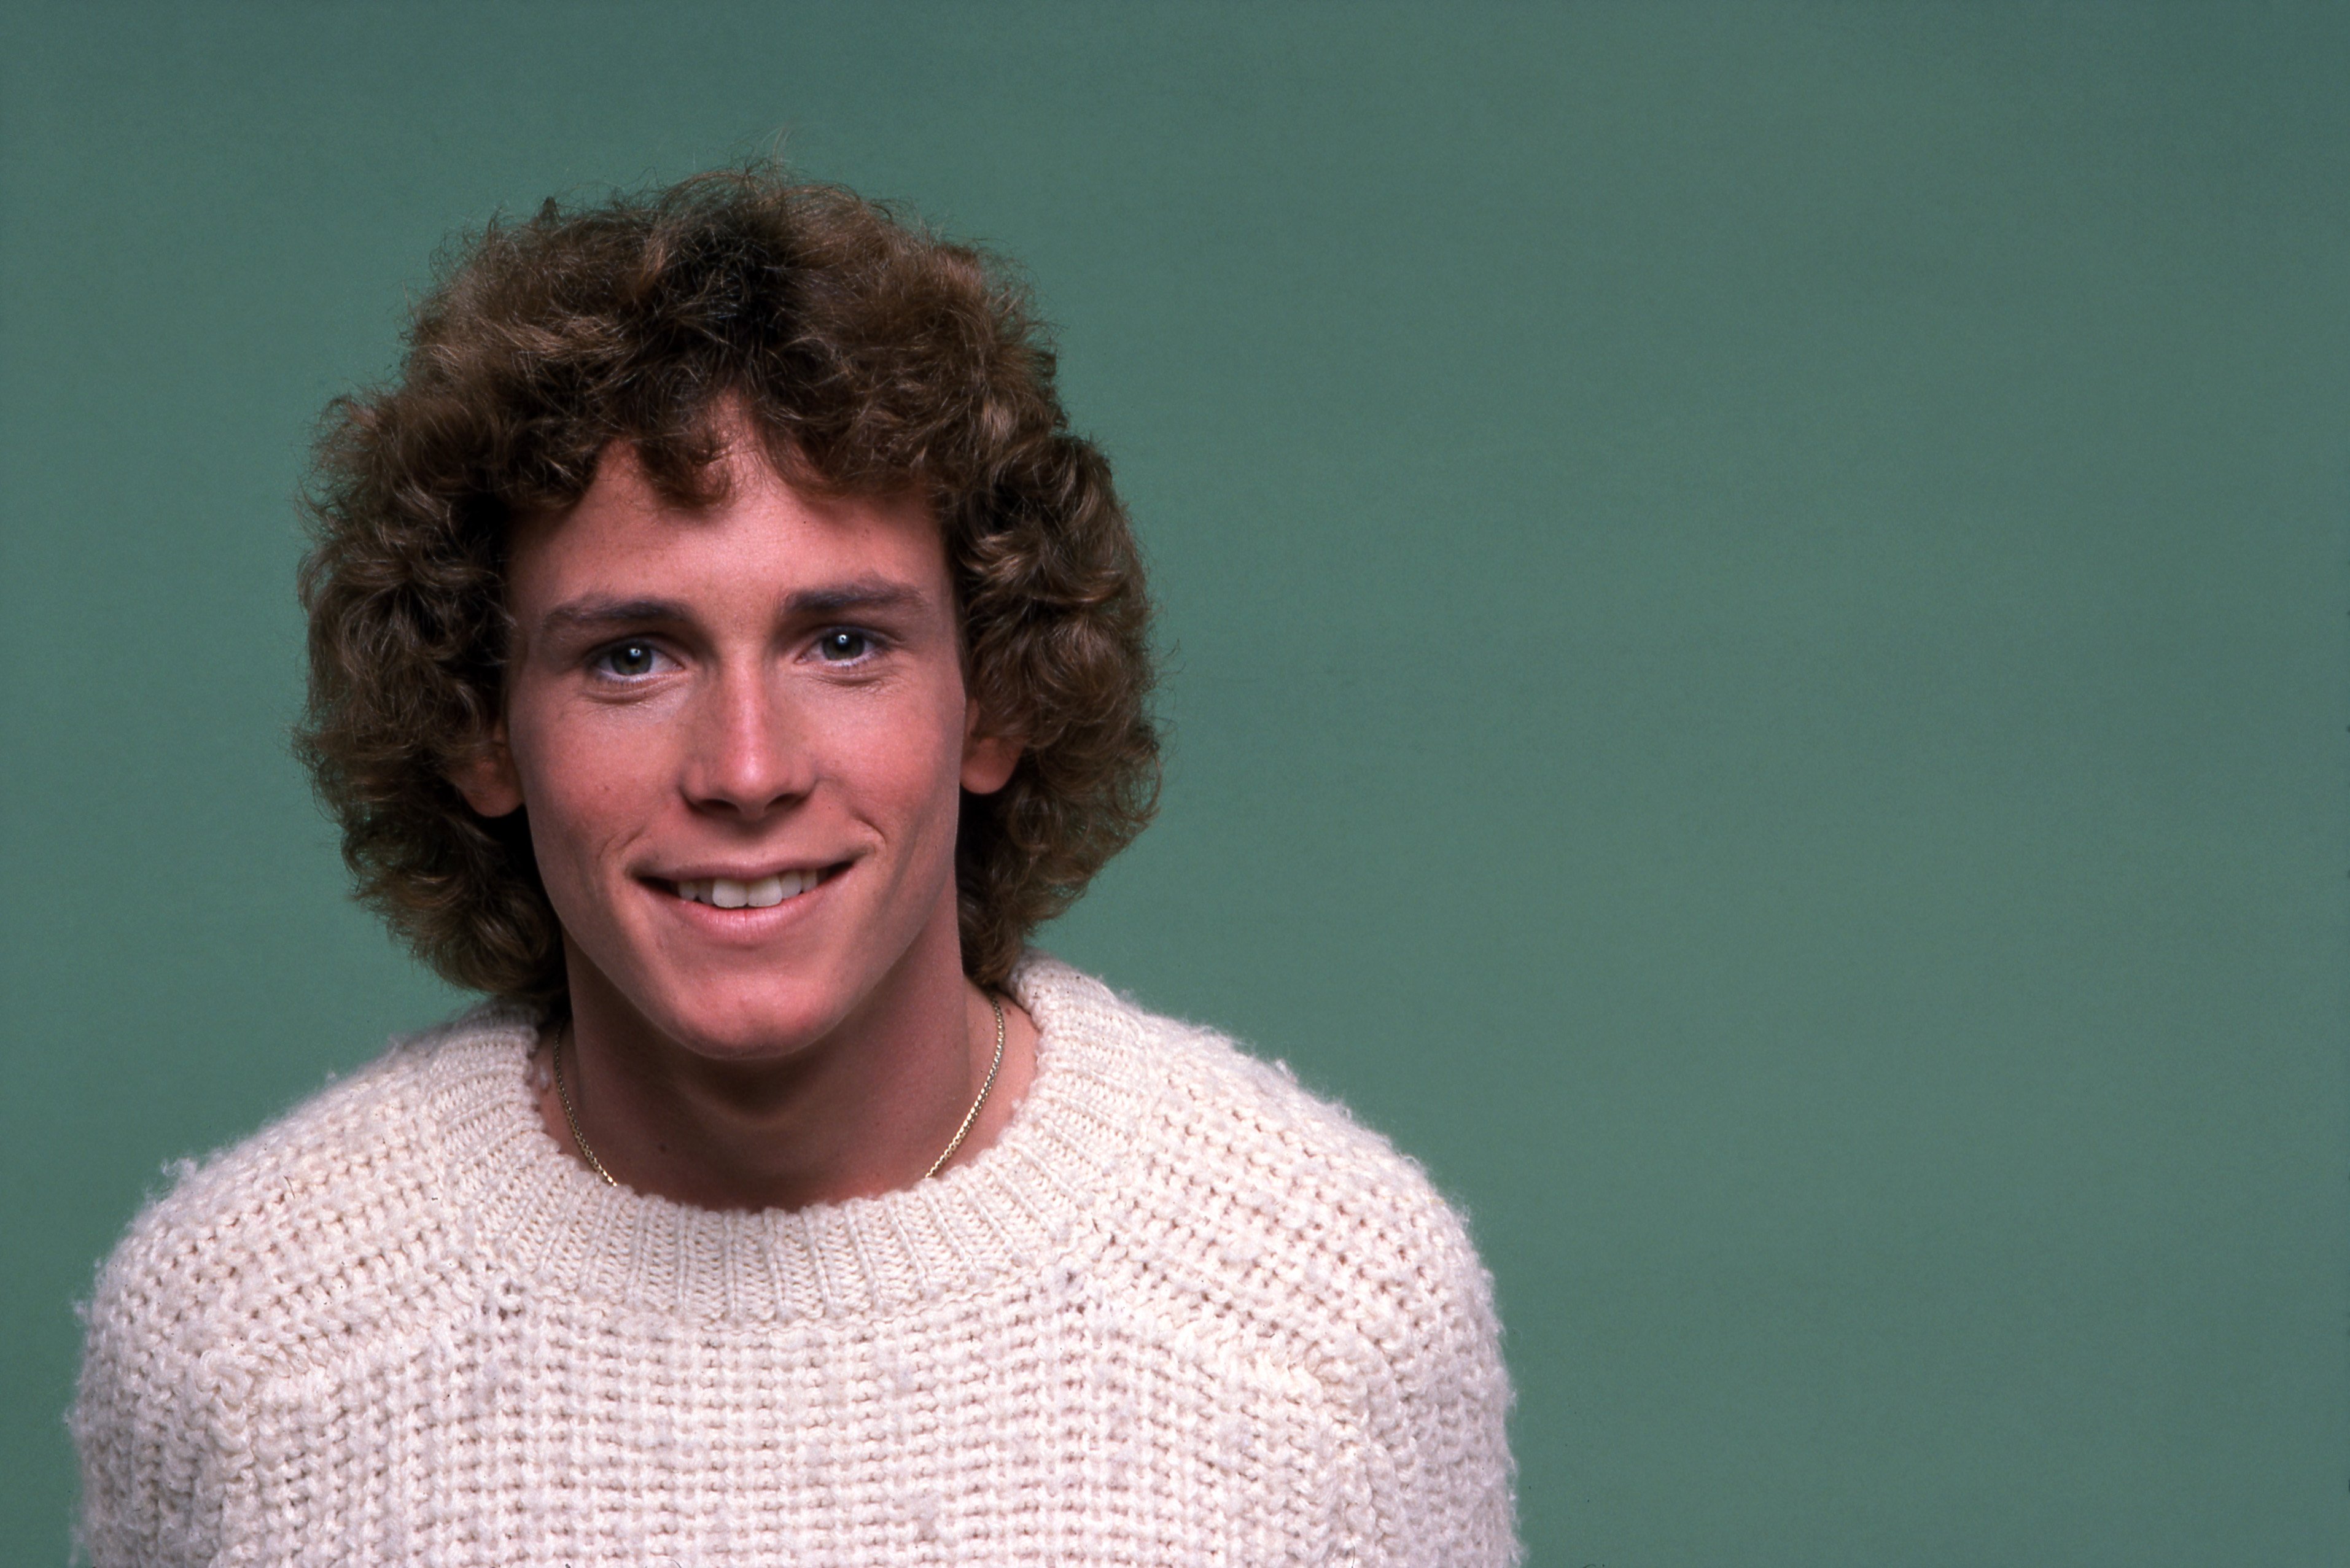 Promotional photo of Willie Aames in 1978. | Source: Getty Images